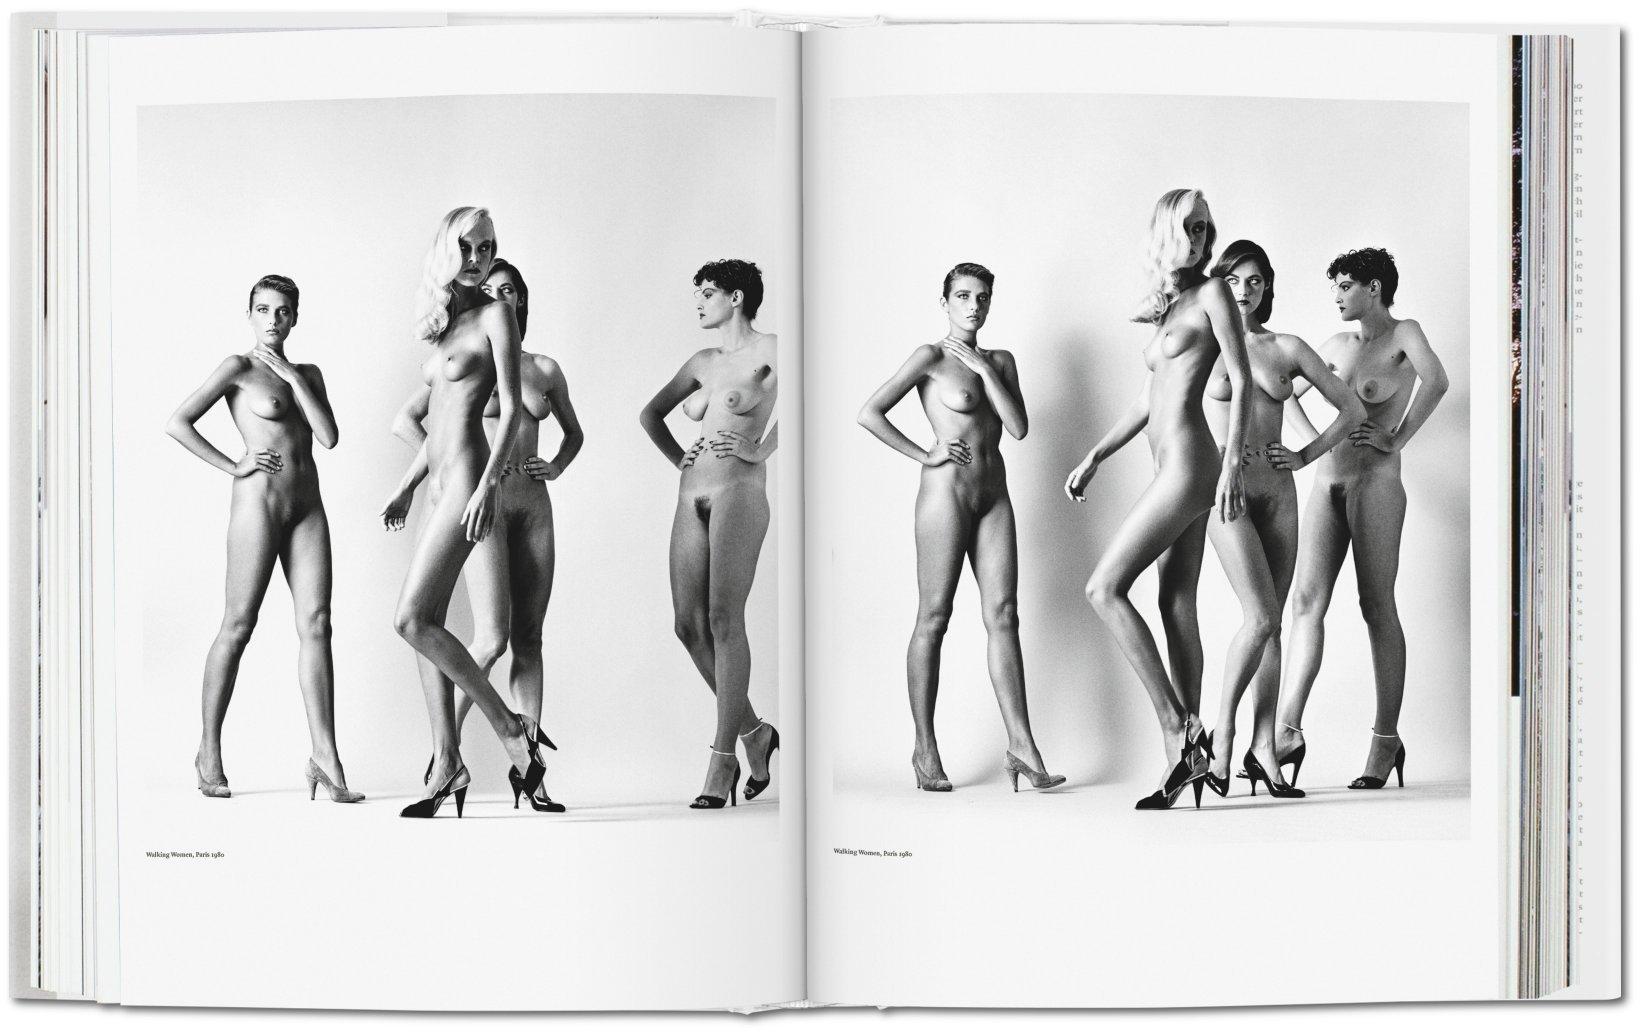 BABY SUMO, welcome to the world!
The legendary Helmut Newton SUMO in a spectacular new edition
The Helmut Newton SUMO was overwhelming in every respect: a 464-page homage to the most influential and controversial photographer of the 20th century,